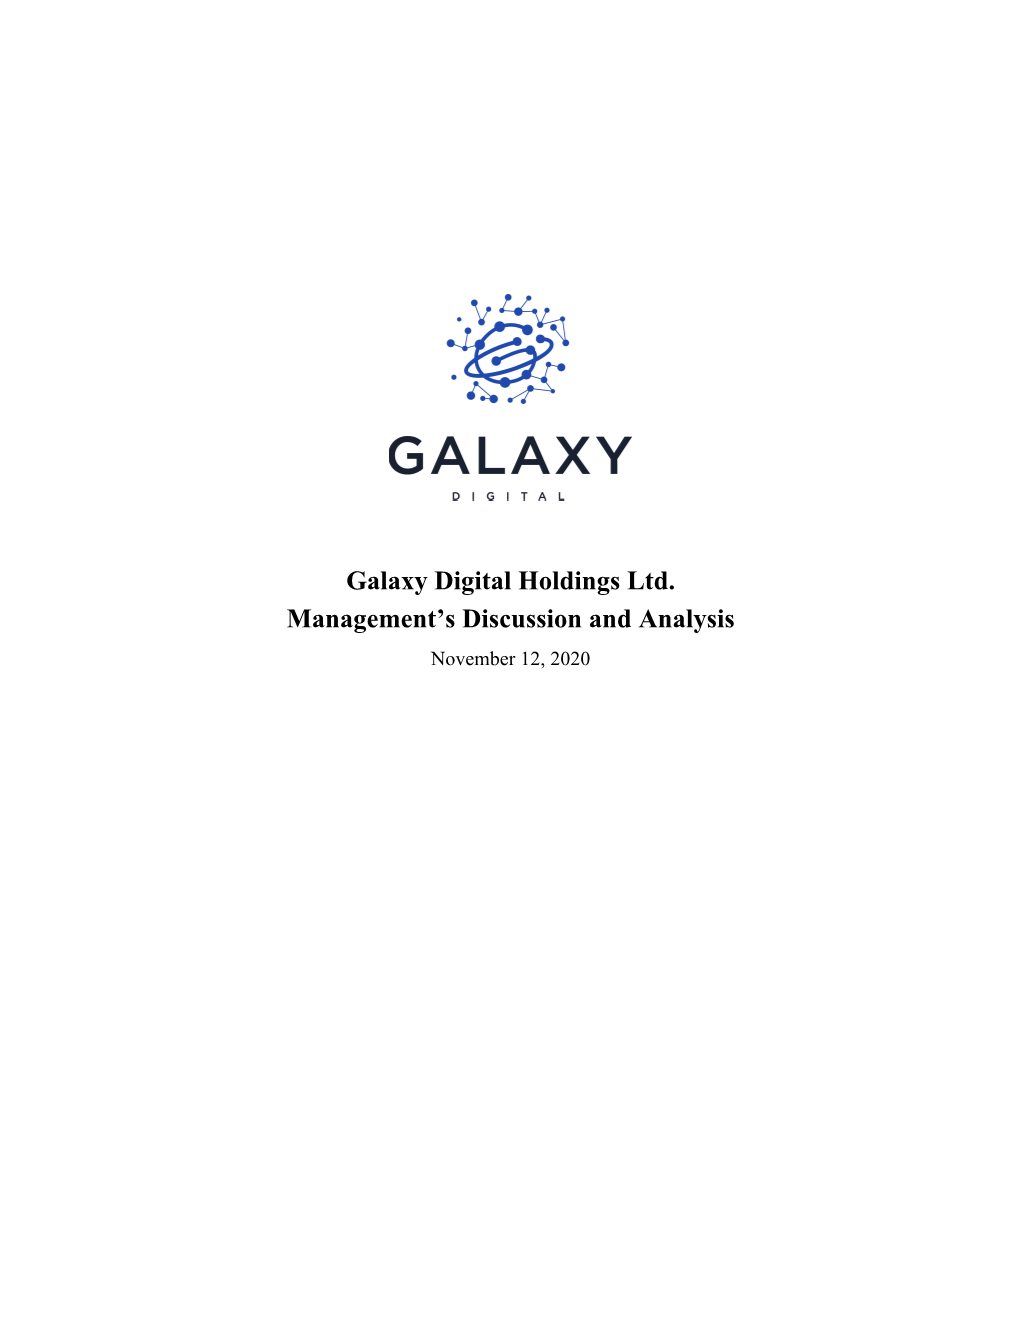 Galaxy Digital Holdings Ltd. Management's Discussion And